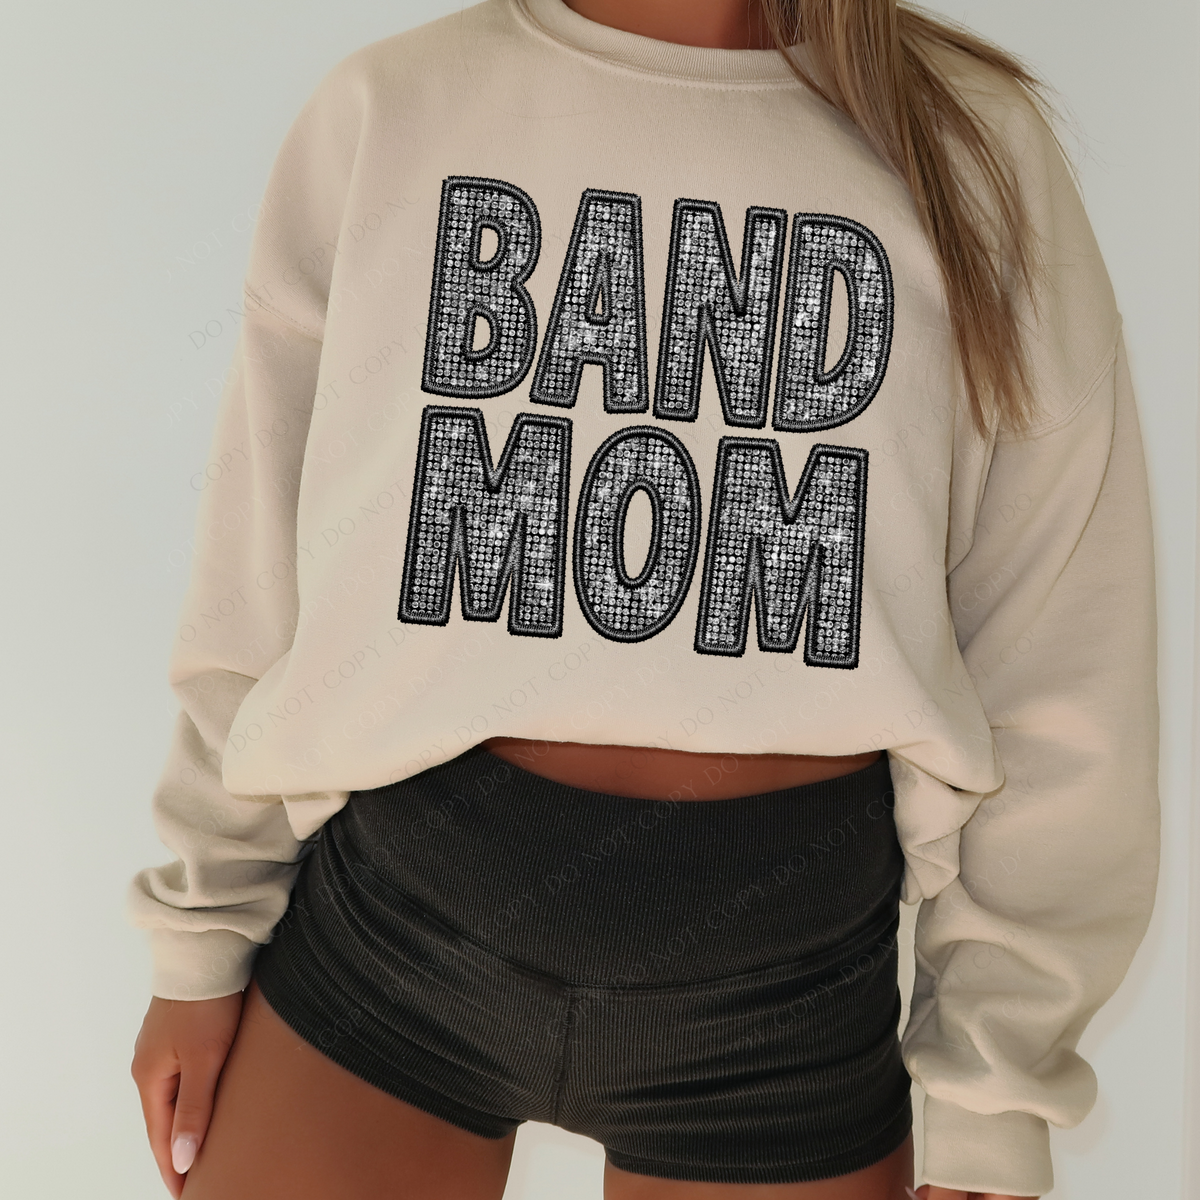 Band Mom Faux Embroidery Diamonds Bling in Black Digital Design, PNG